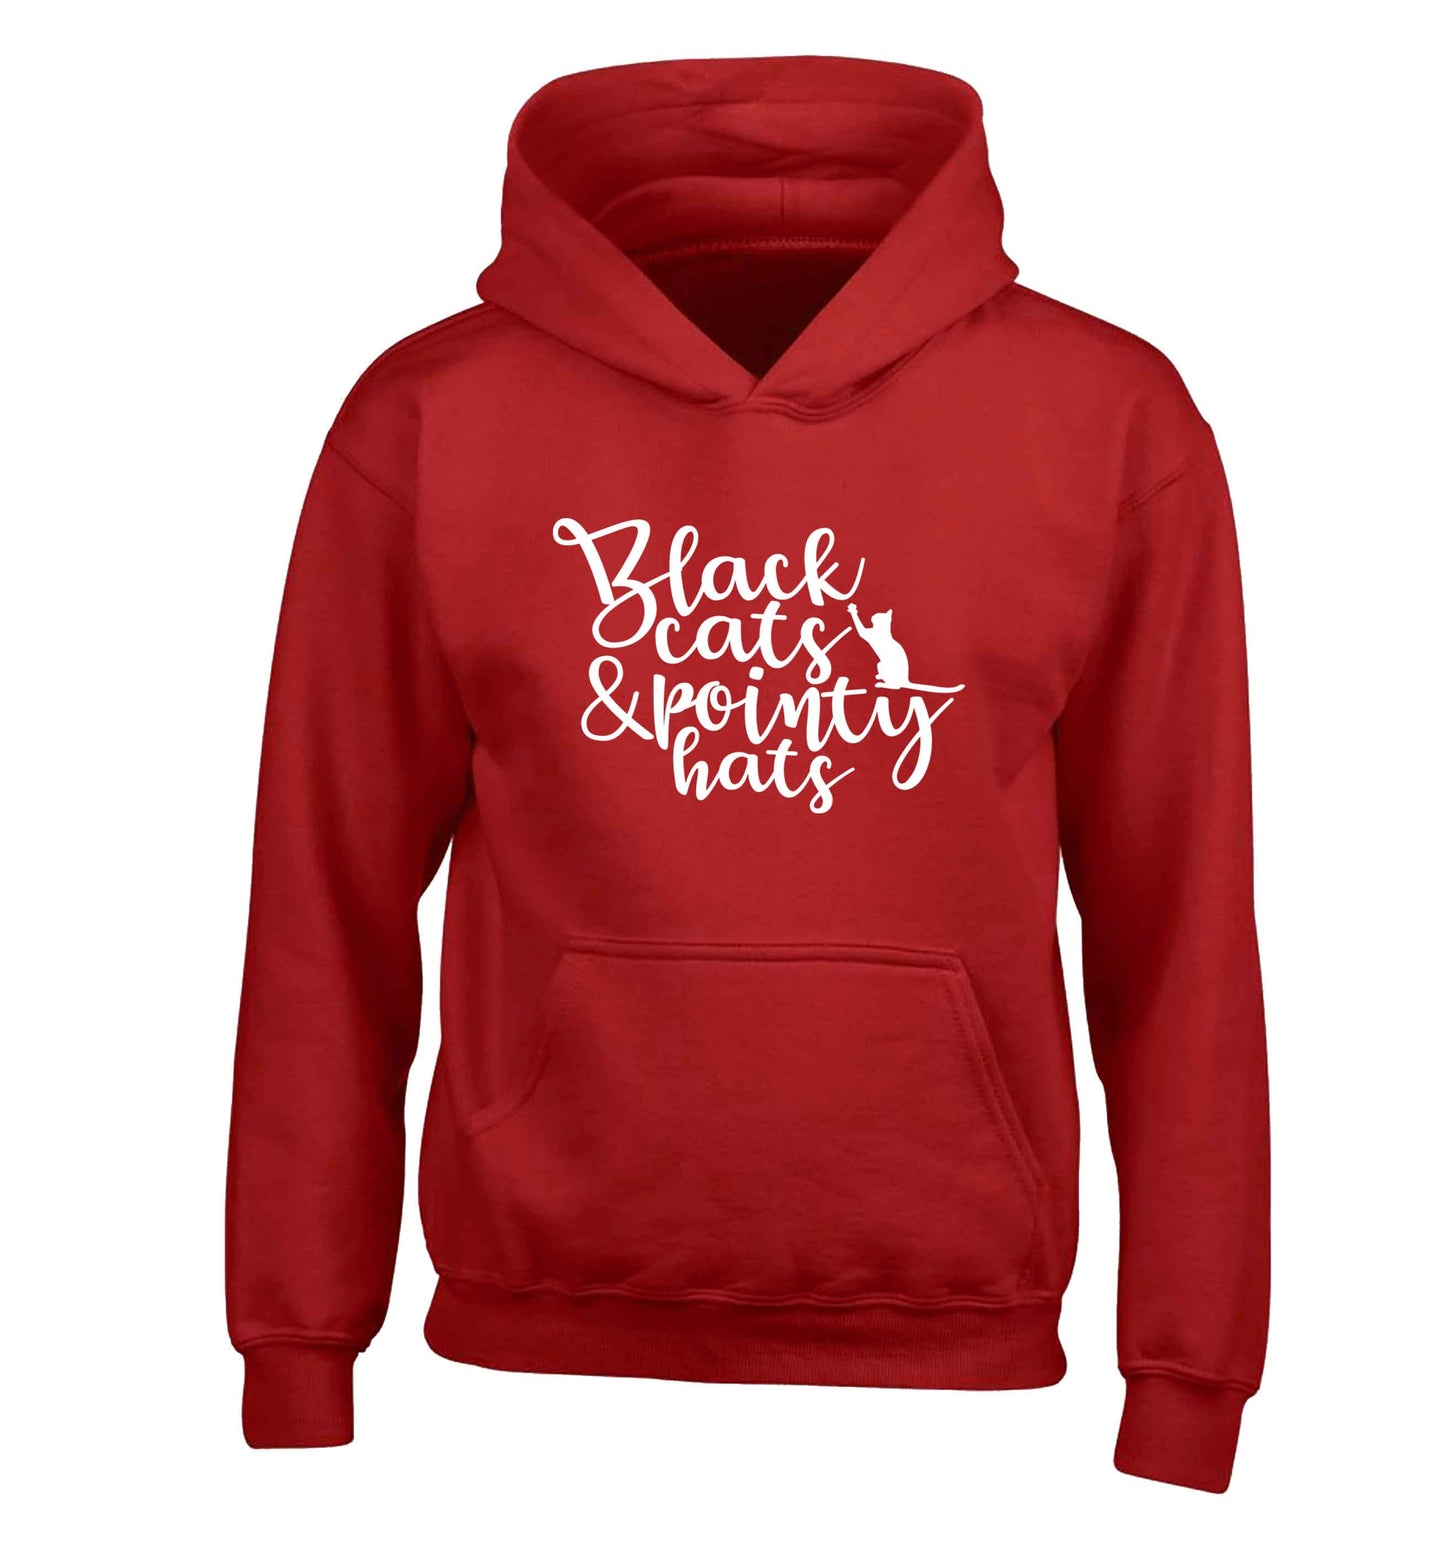 Black cats and pointy hats children's red hoodie 12-13 Years